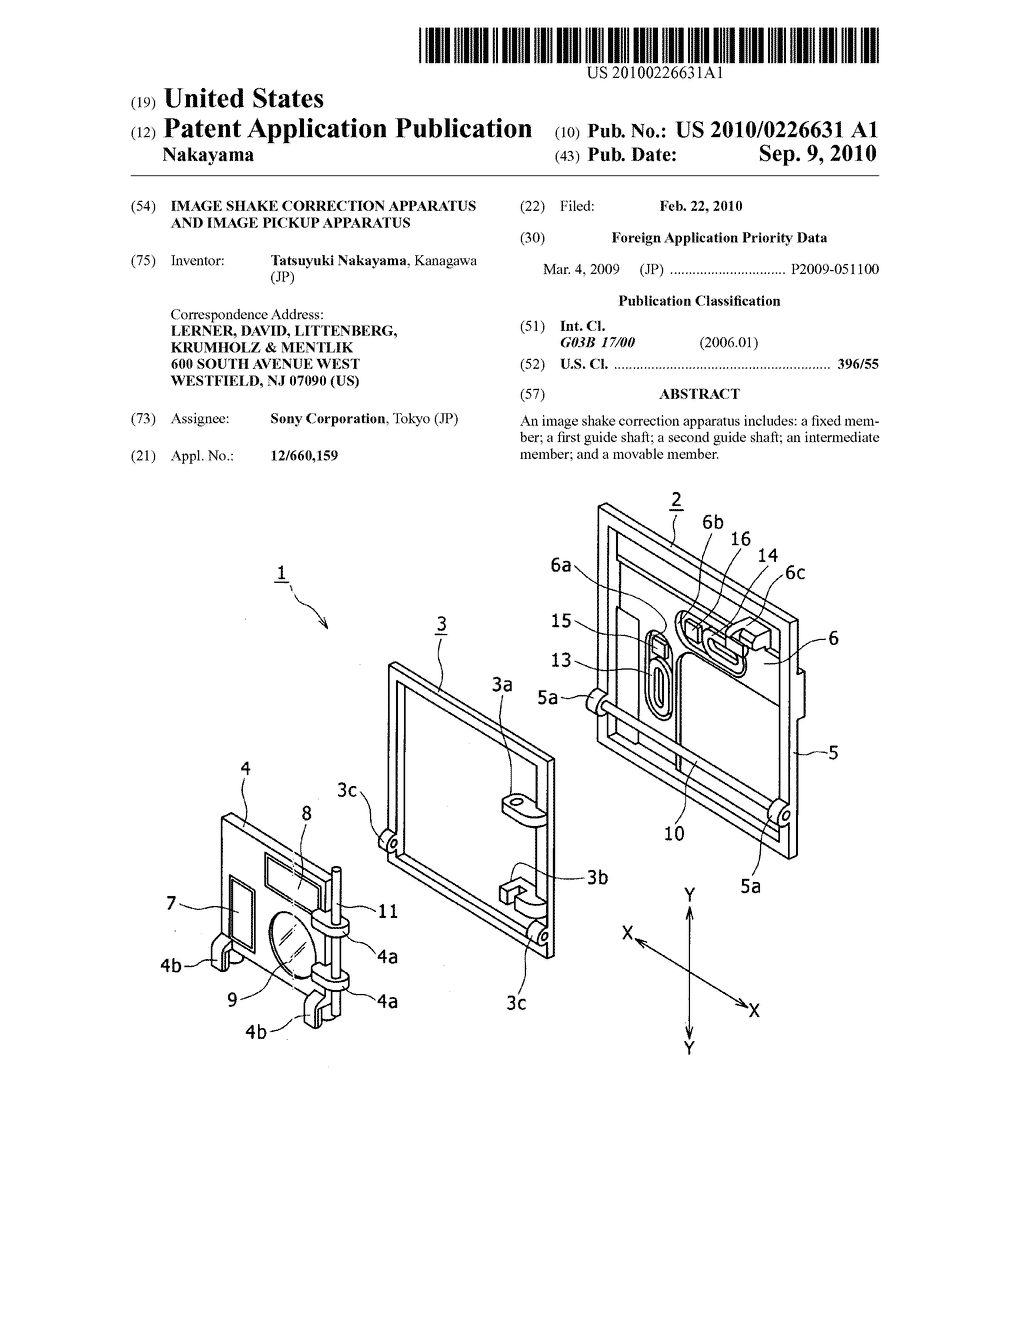 Image shake correction apparatus and image pickup apparatus - diagram, schematic, and image 01